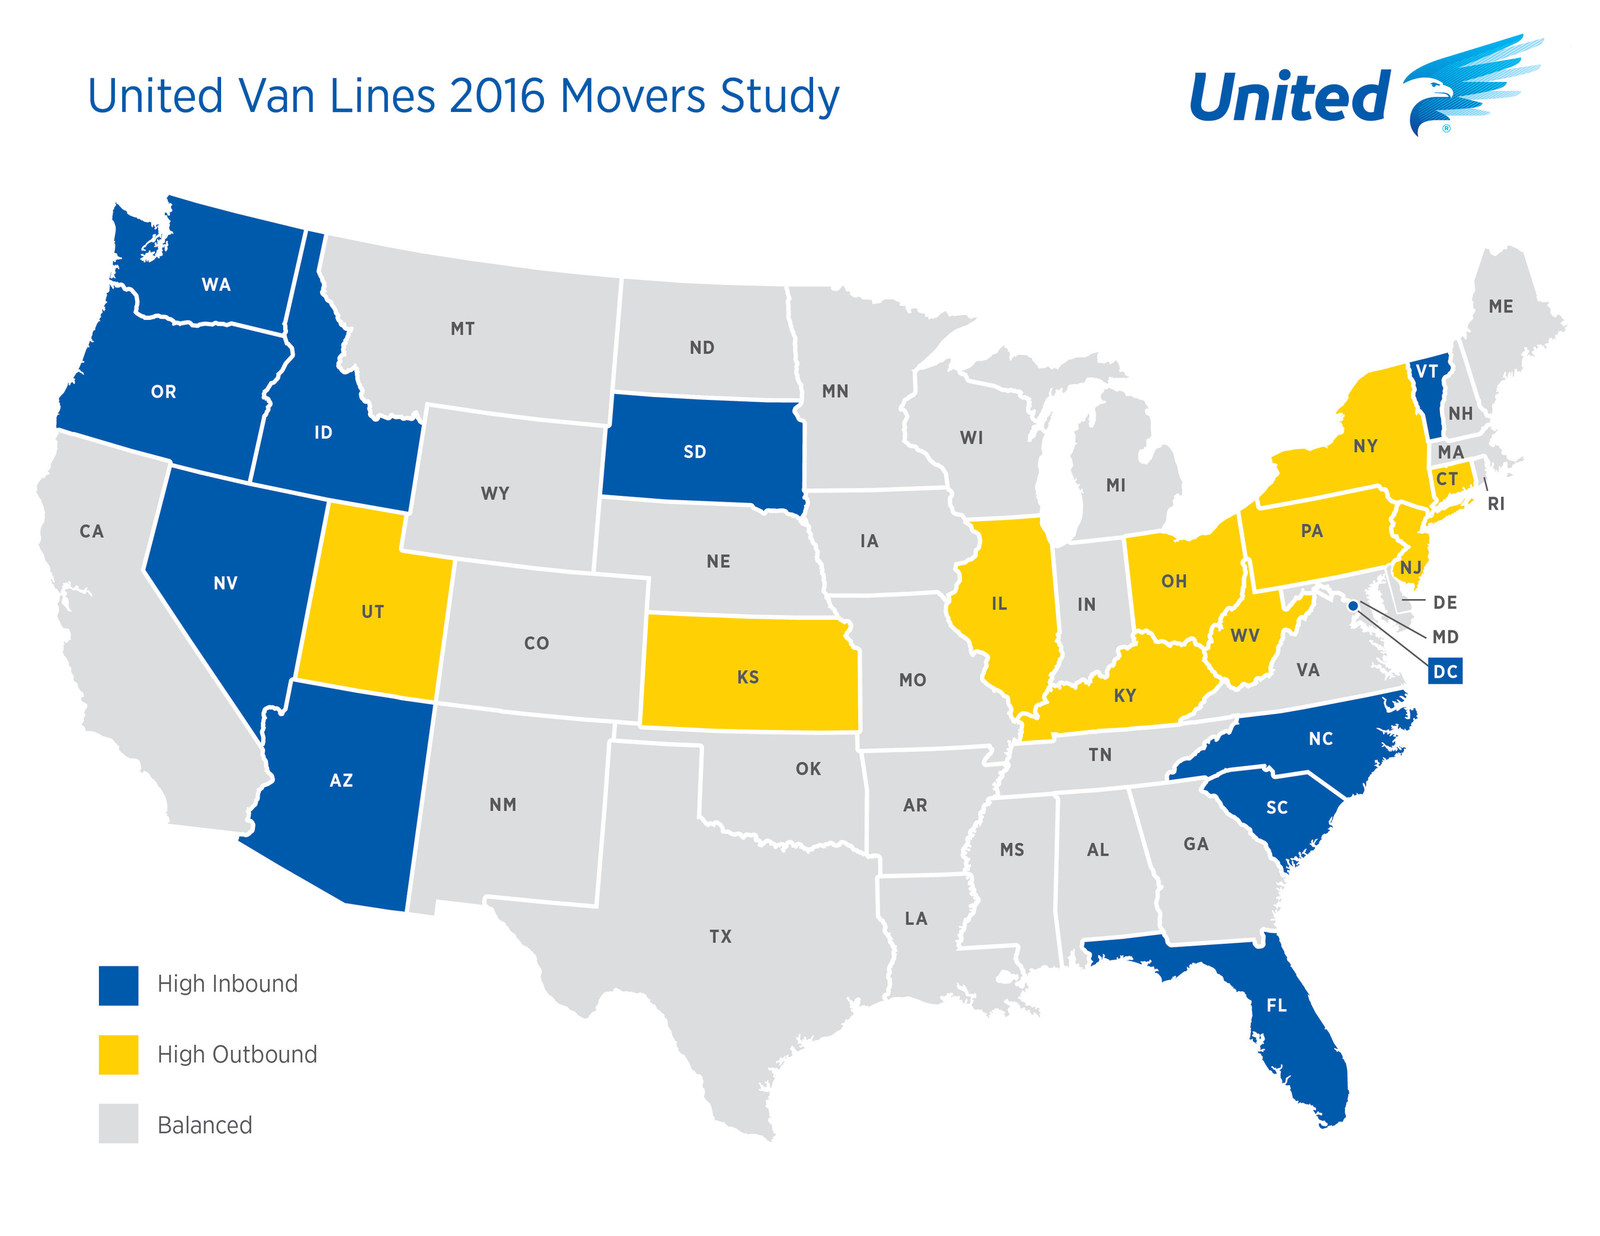 United Van Lines' 40th Annual National Movers Study